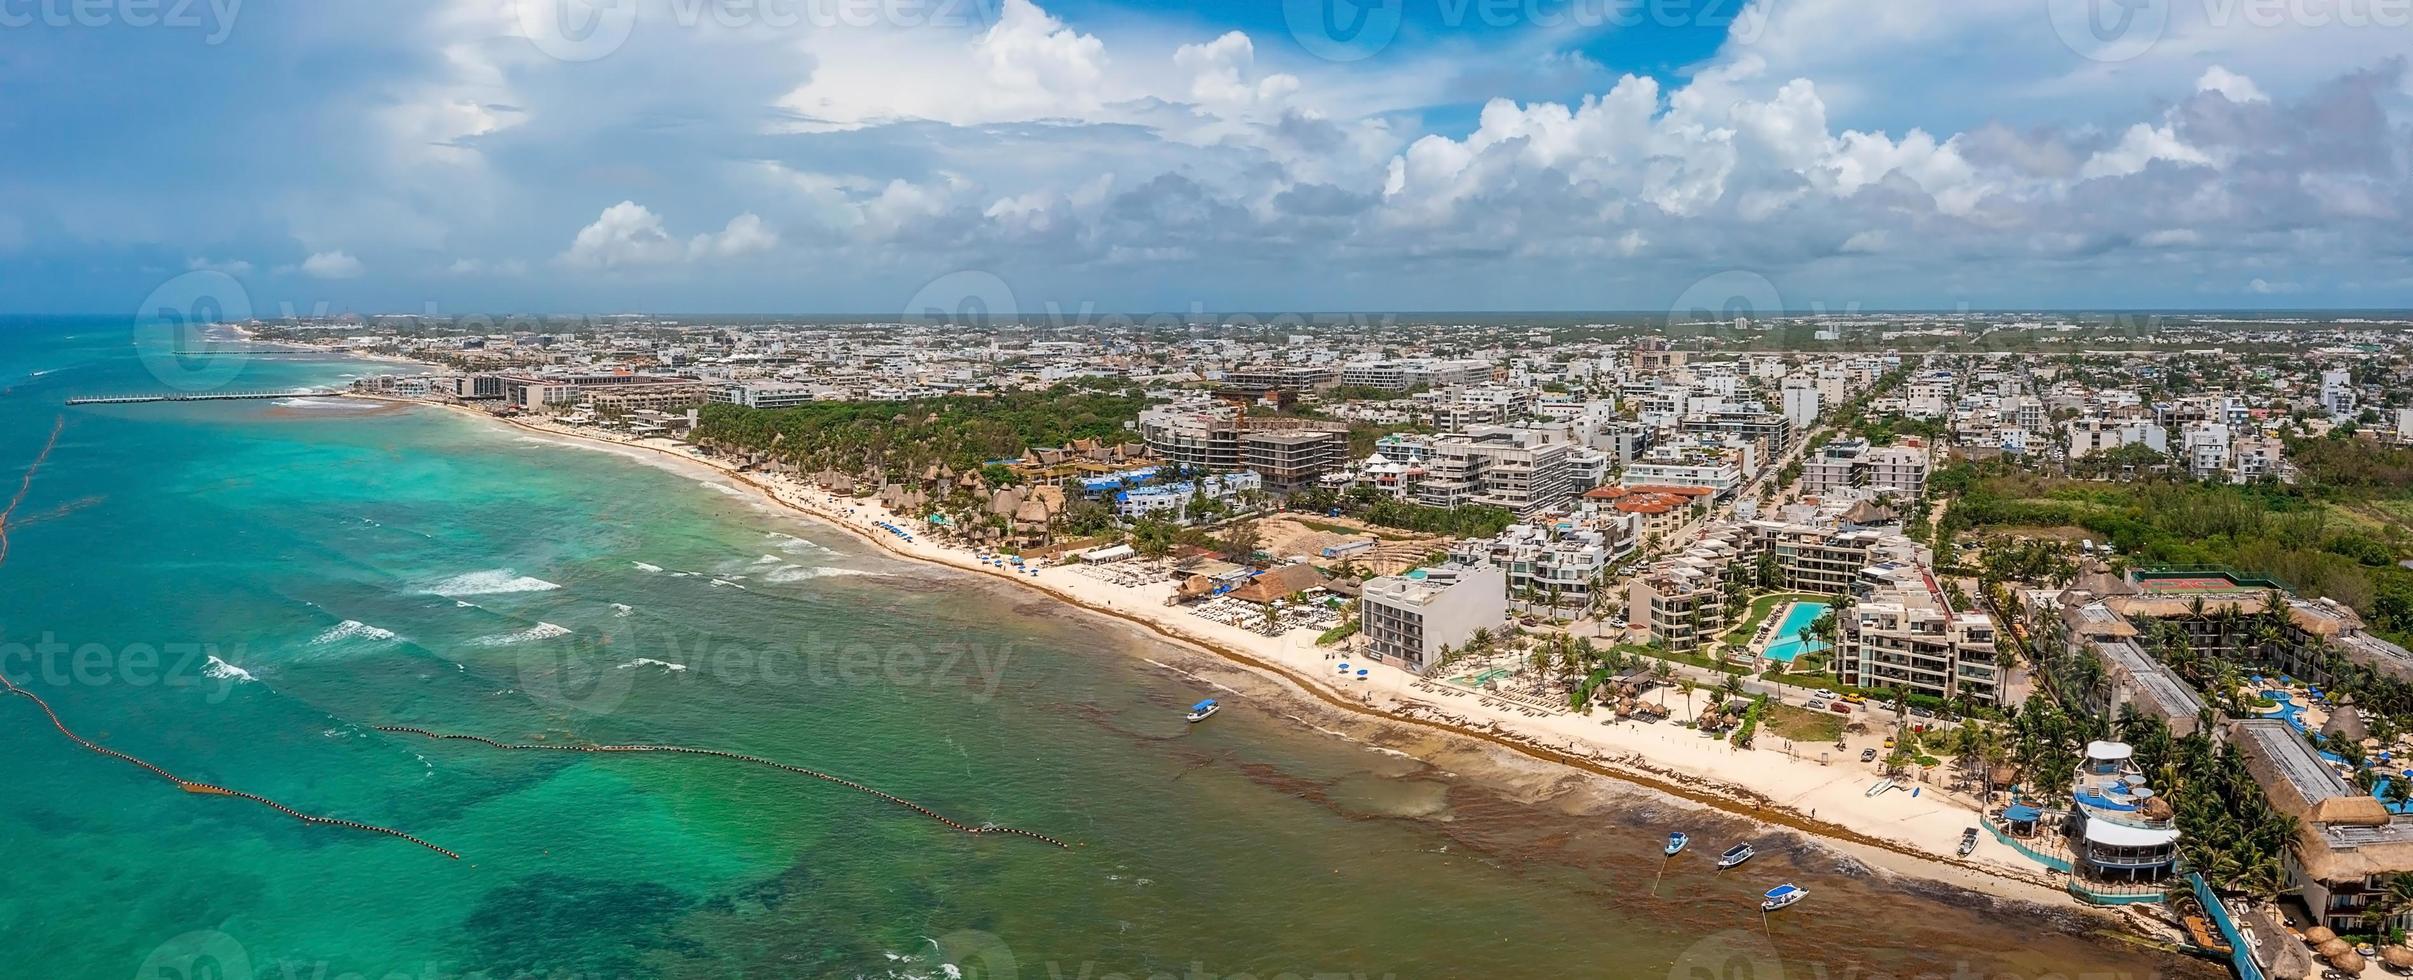 Aerial view of the Playa Del Carmen town in Mexico. photo